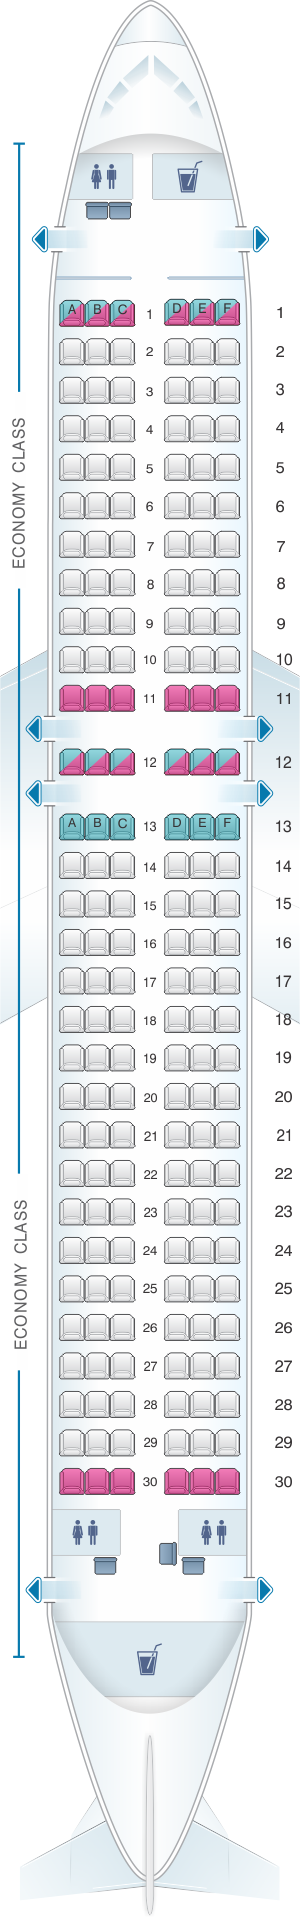 Seat Map Monarch Airlines Airbus A320 200 | SeatMaestro